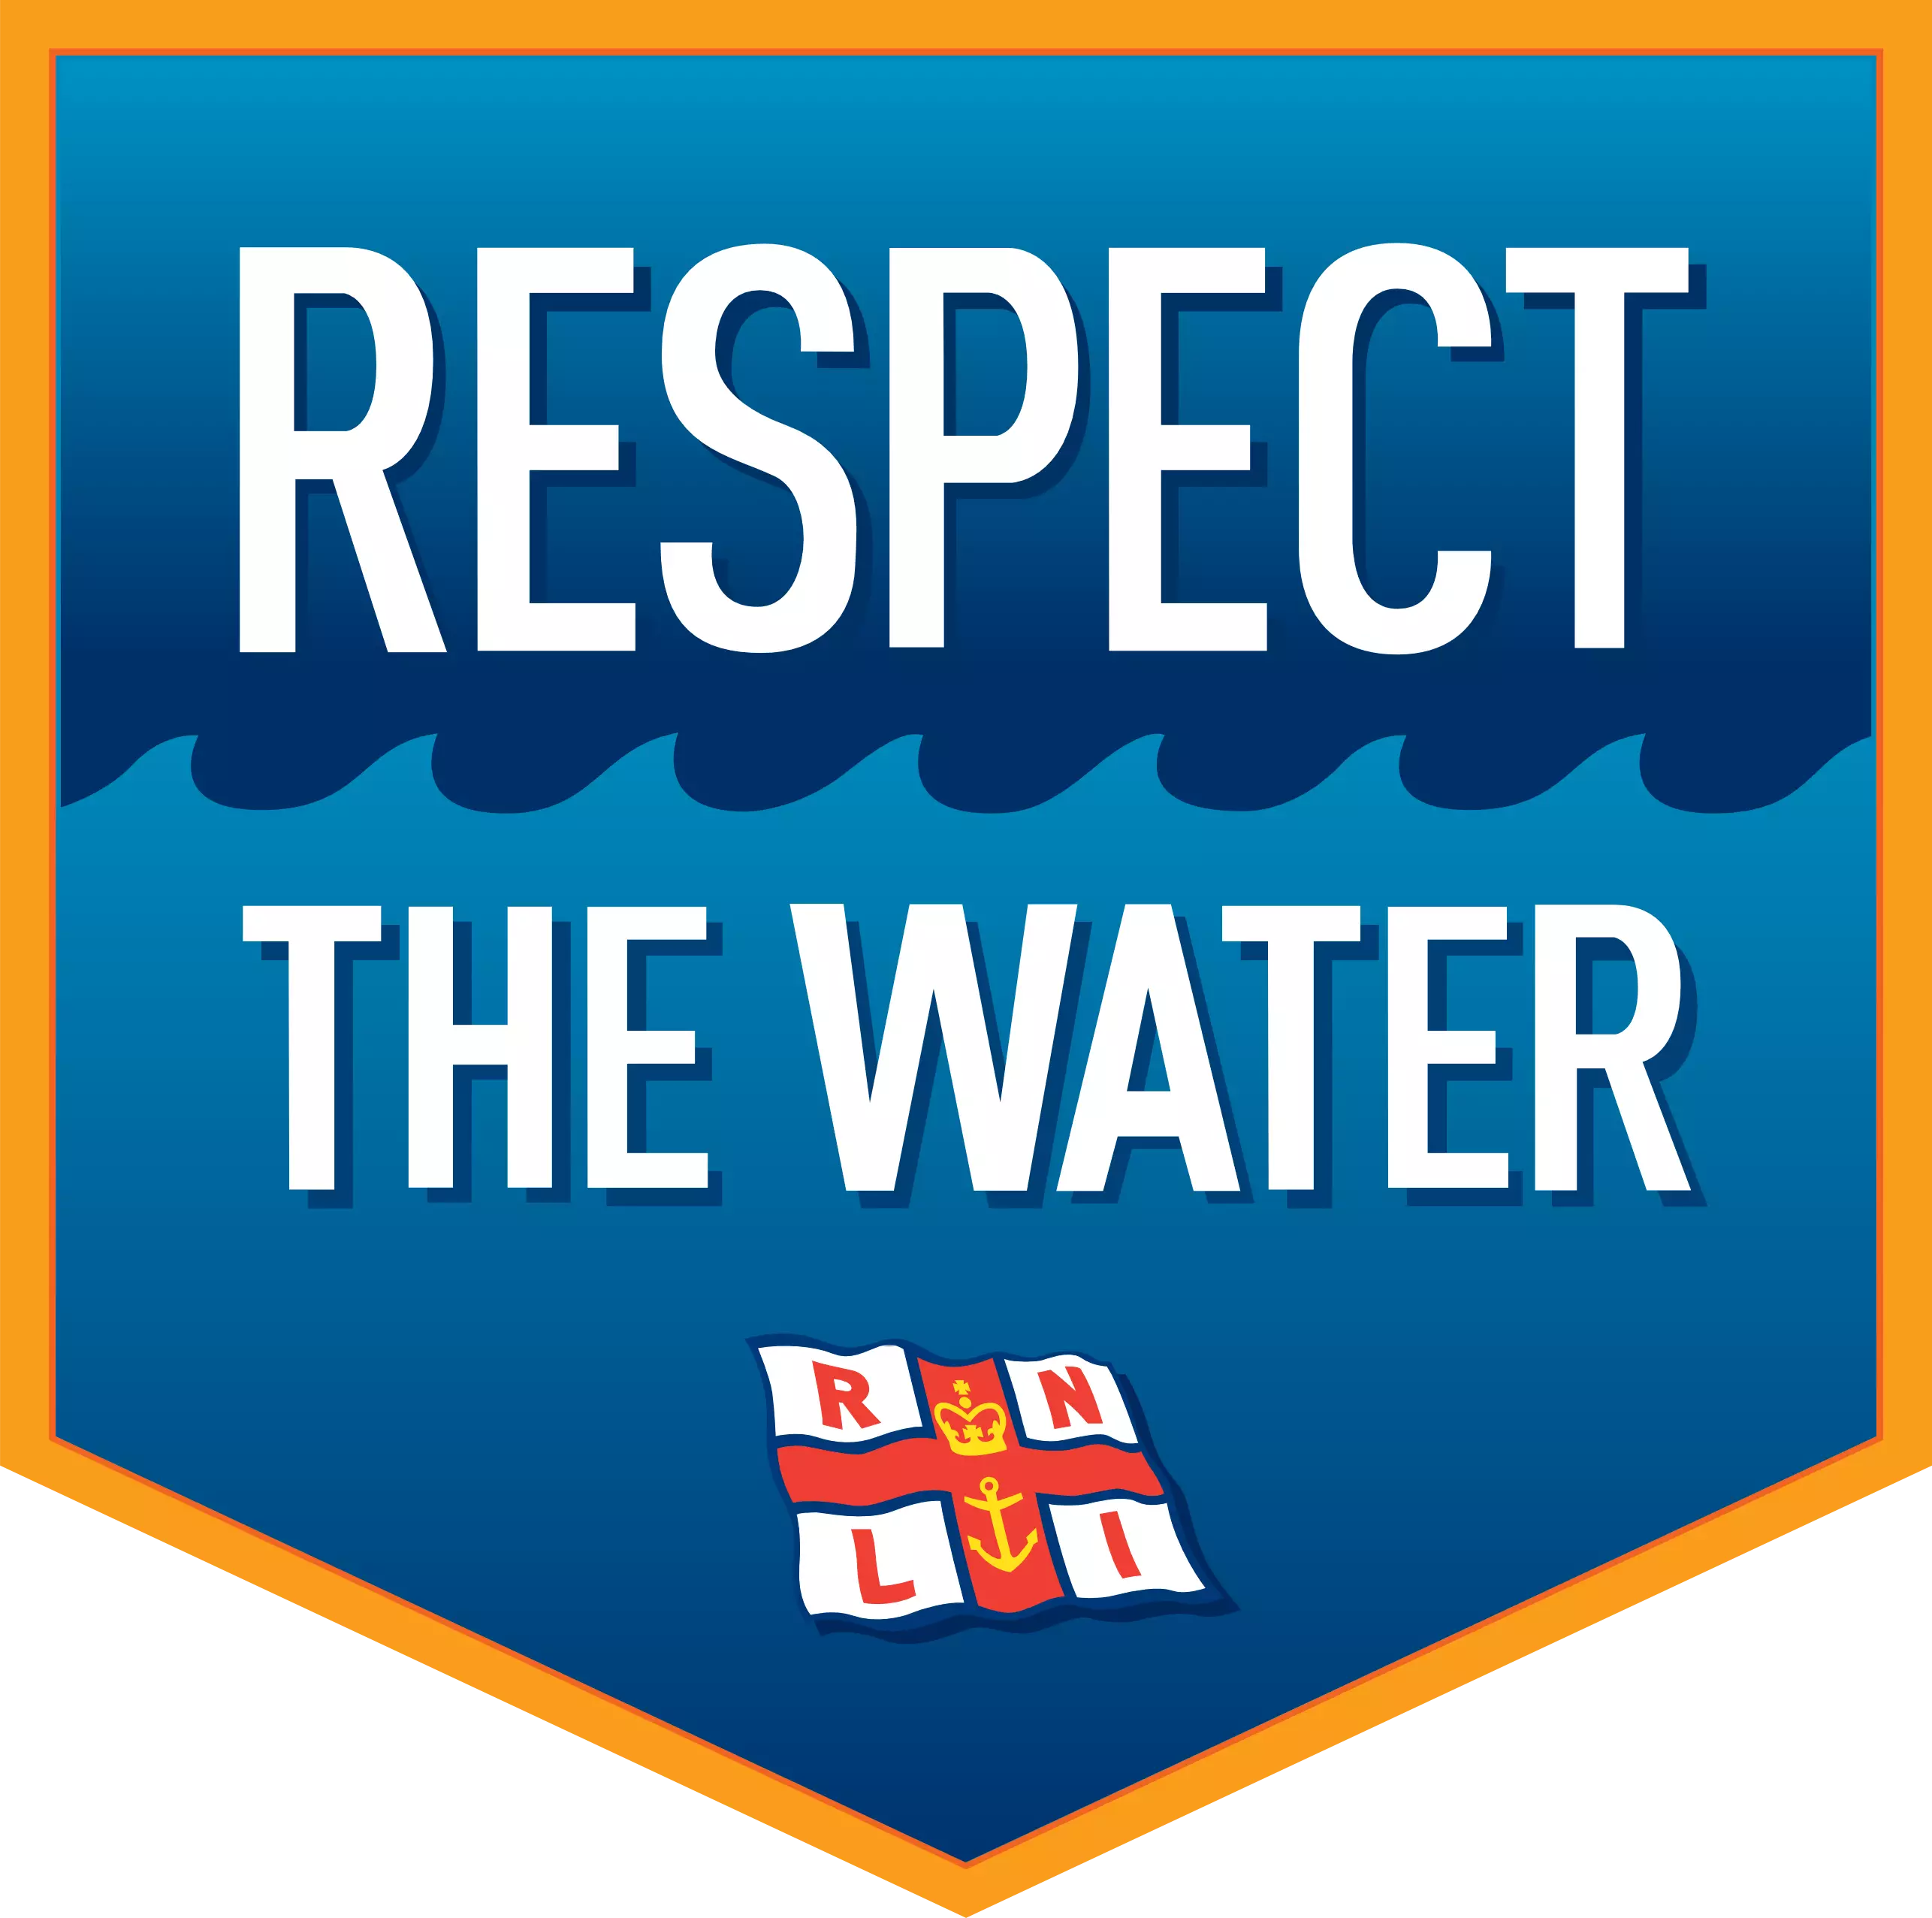 RESPECT THE WATER